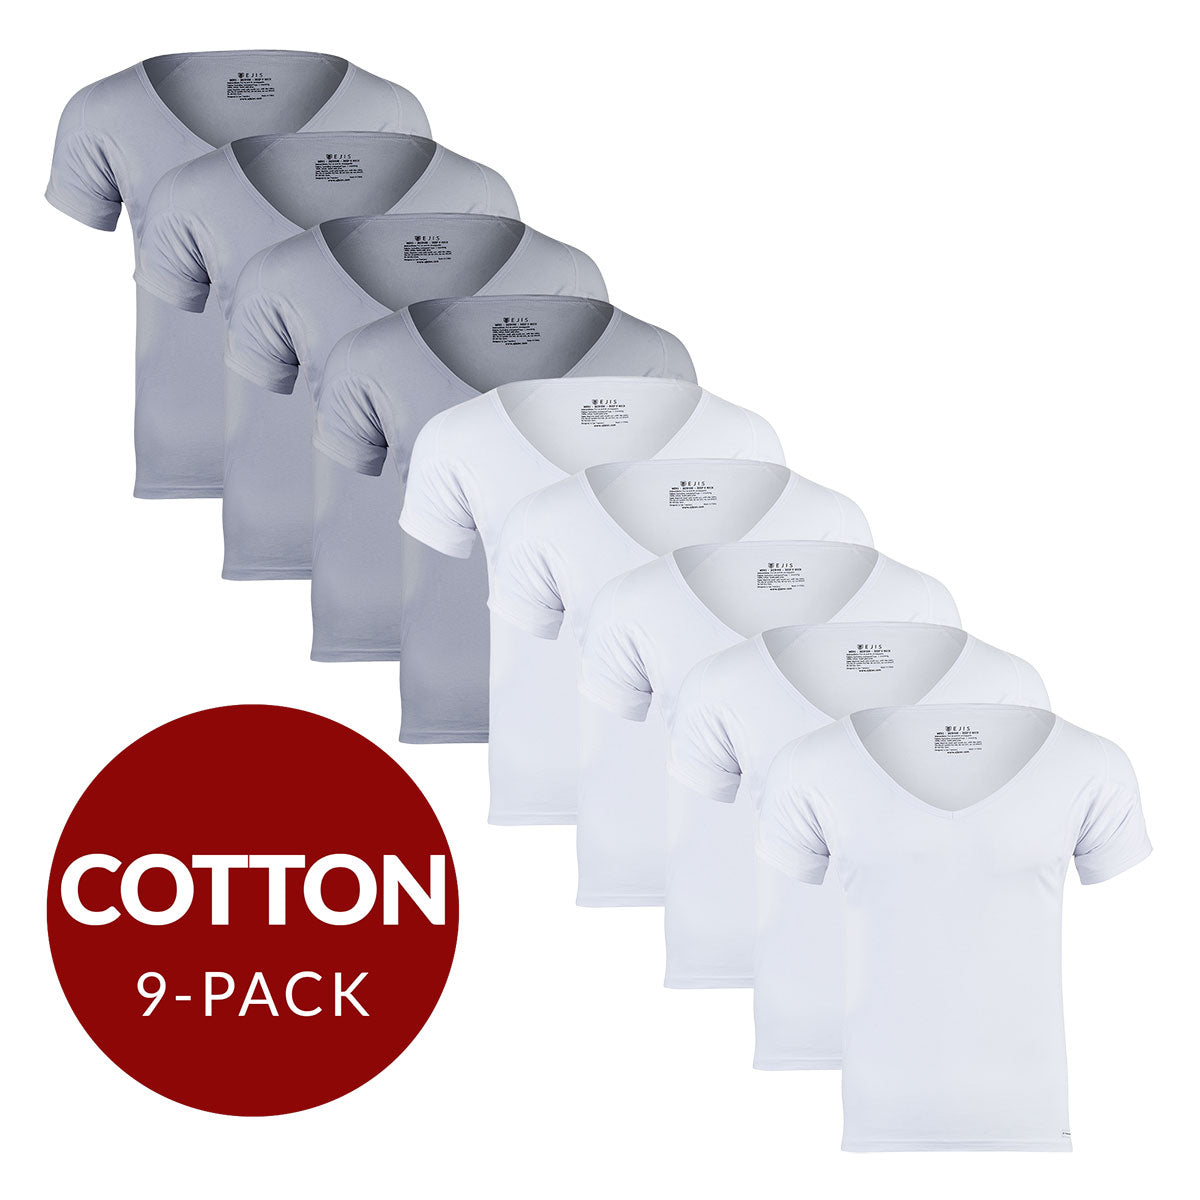 Deep V Cotton Sweat Proof Undershirt For Men - Mix 9-Pack (5x White, 4x Grey) - Ejis